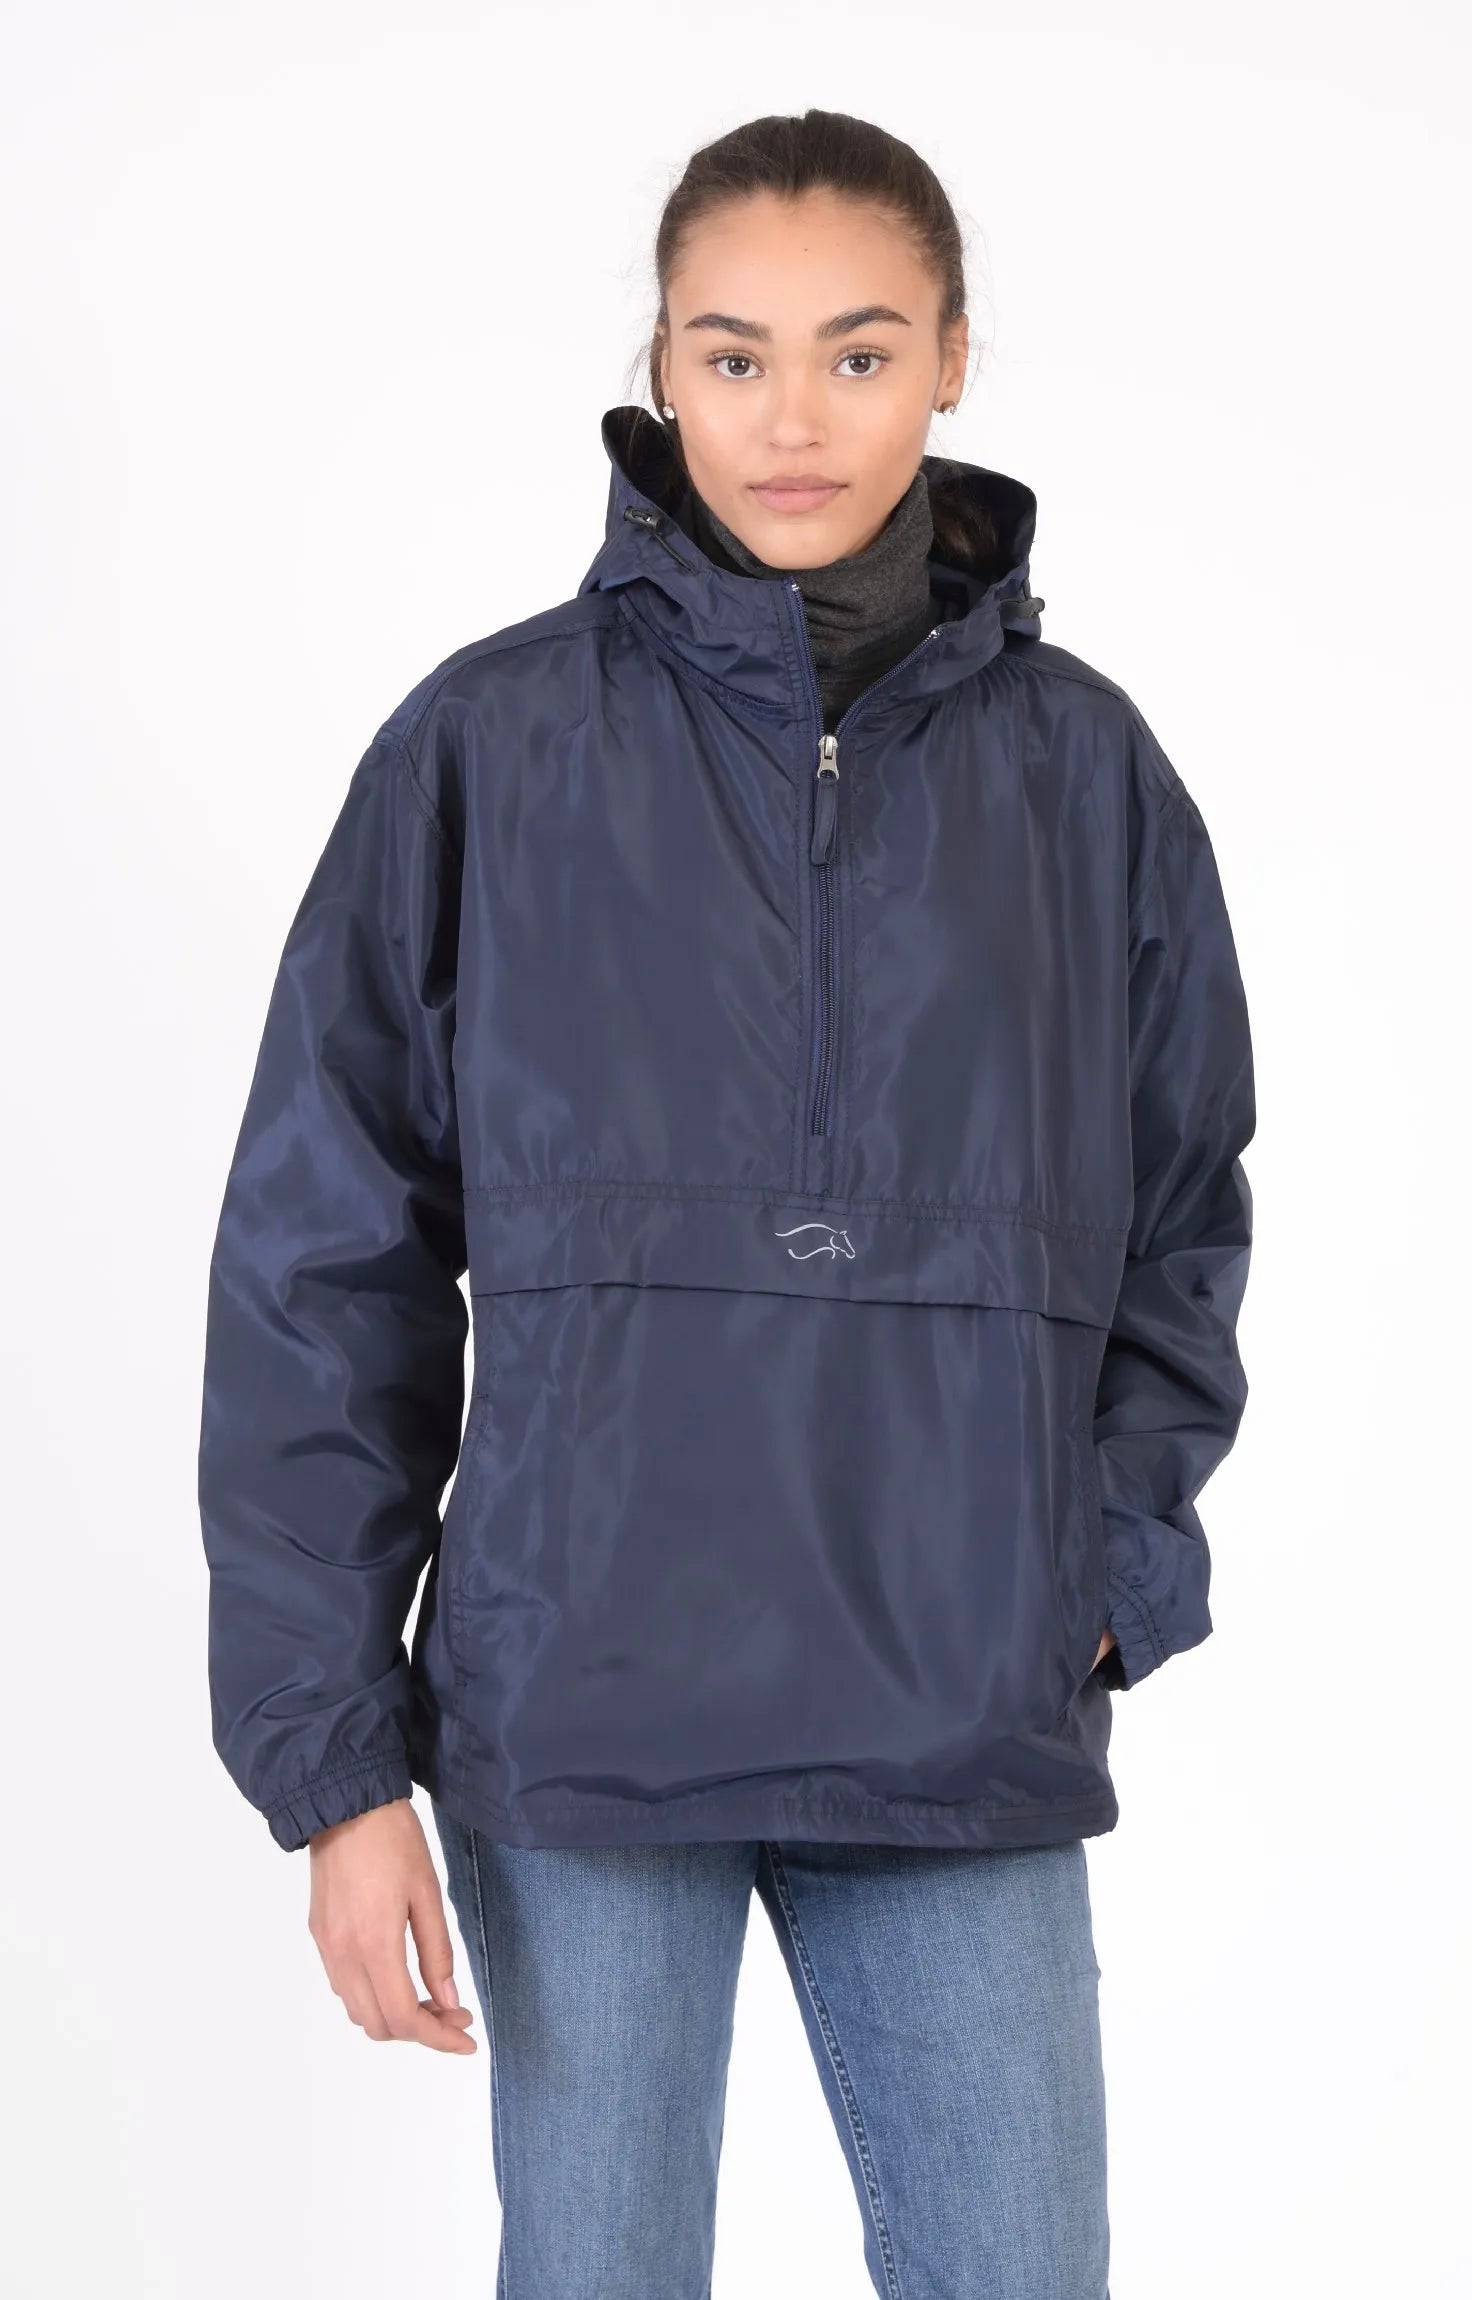 Rainy Day Pullover - Equine Exchange Tack Shop